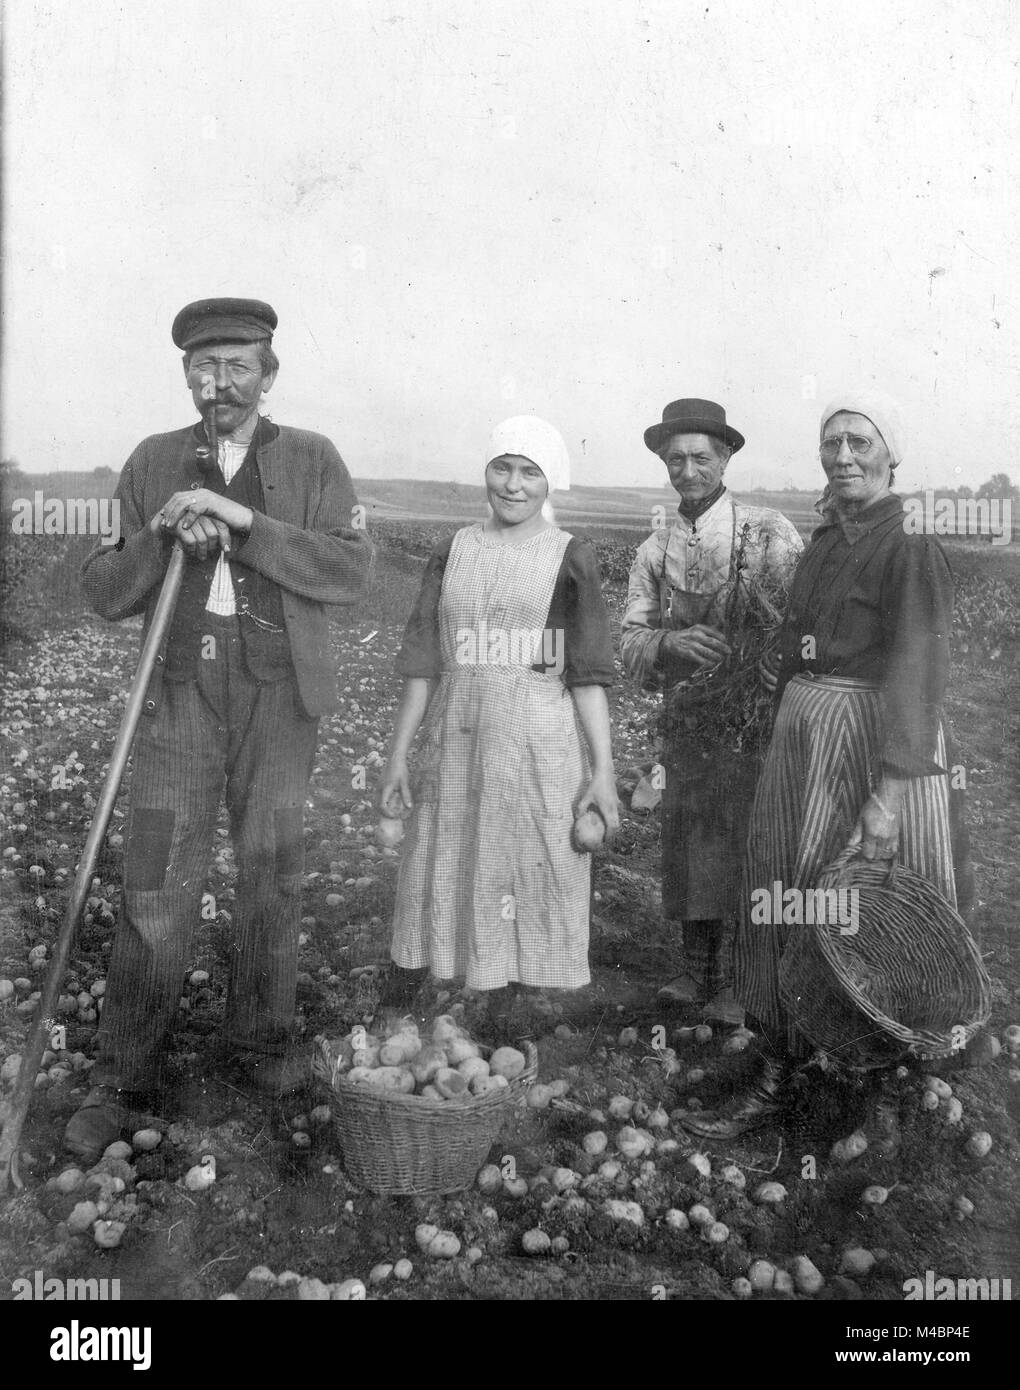 Agriculture,group of farmers harvesting potatoes,1920s,exact place unknown,Germany Stock Photo